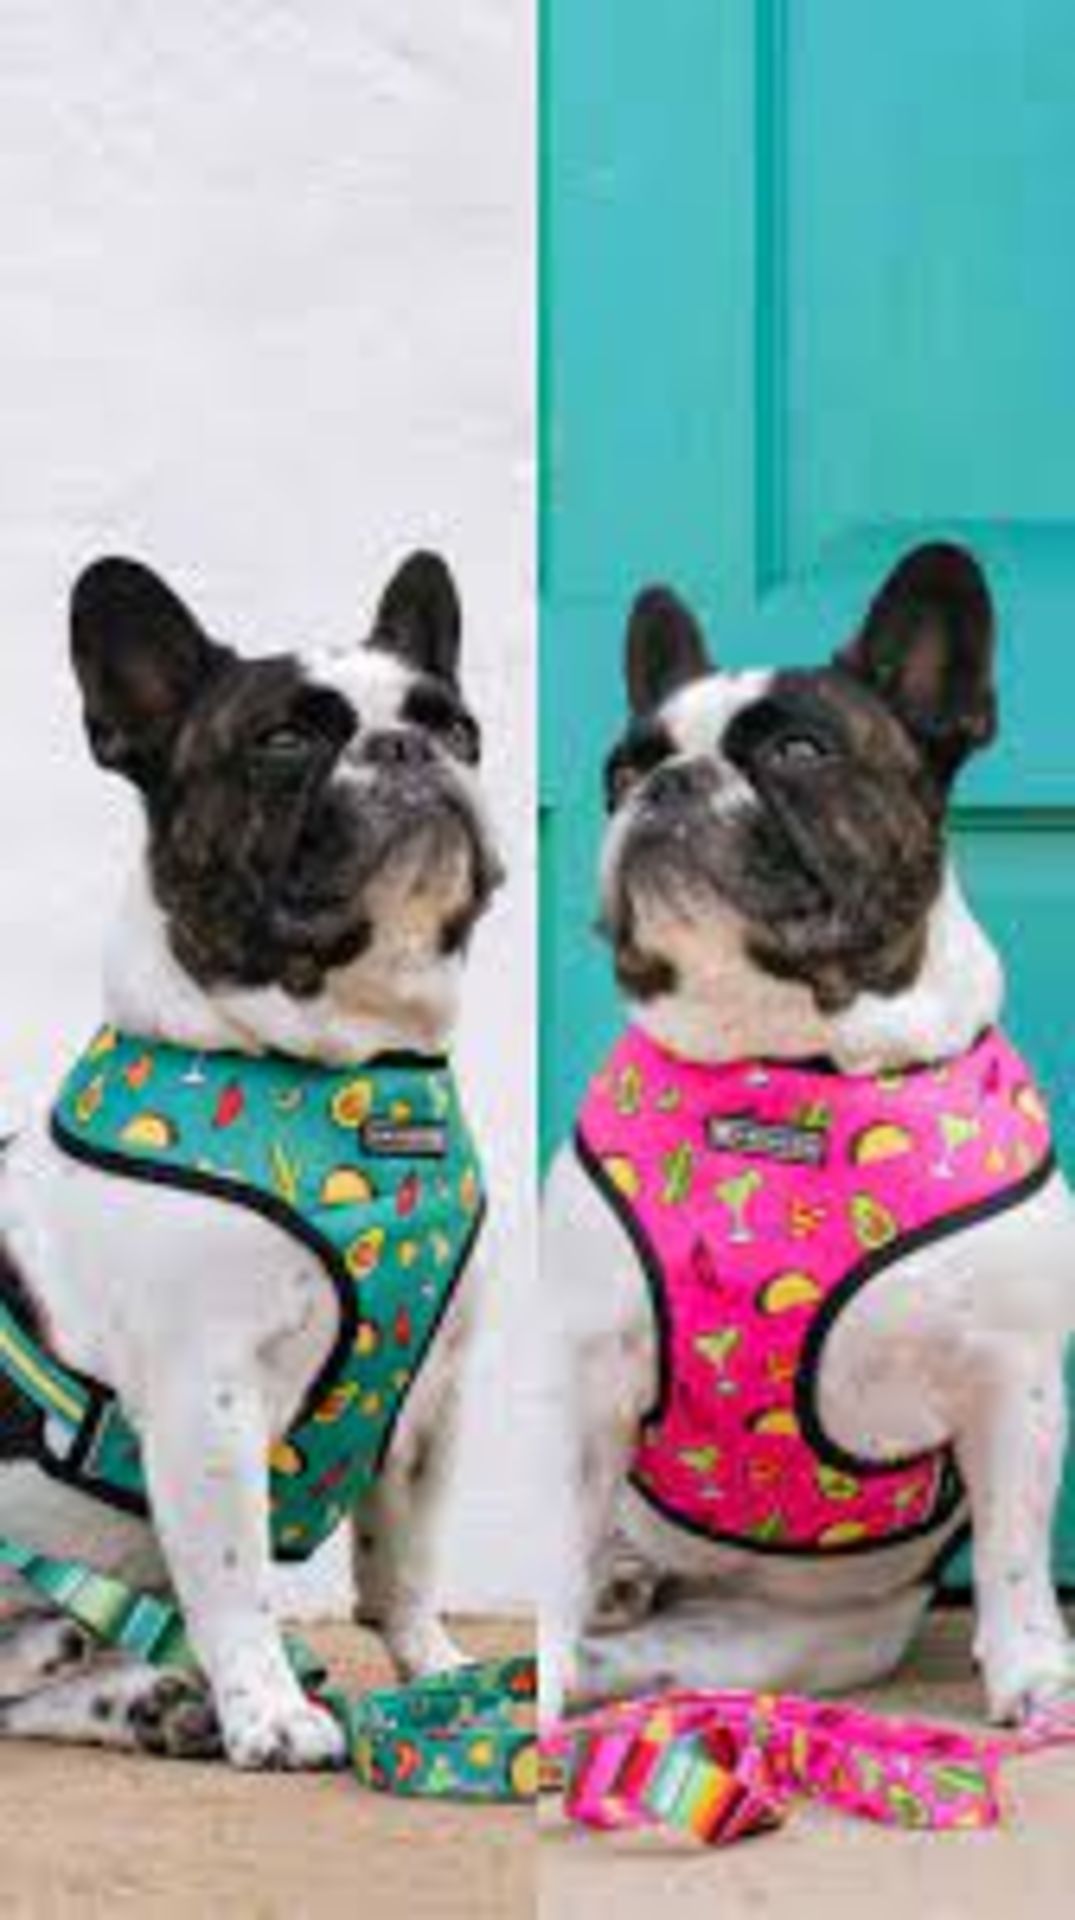 Bulk Trade Lot 1000 X New Packaged Frenchie The Bulldog Luxury Branded Dog Products. May include